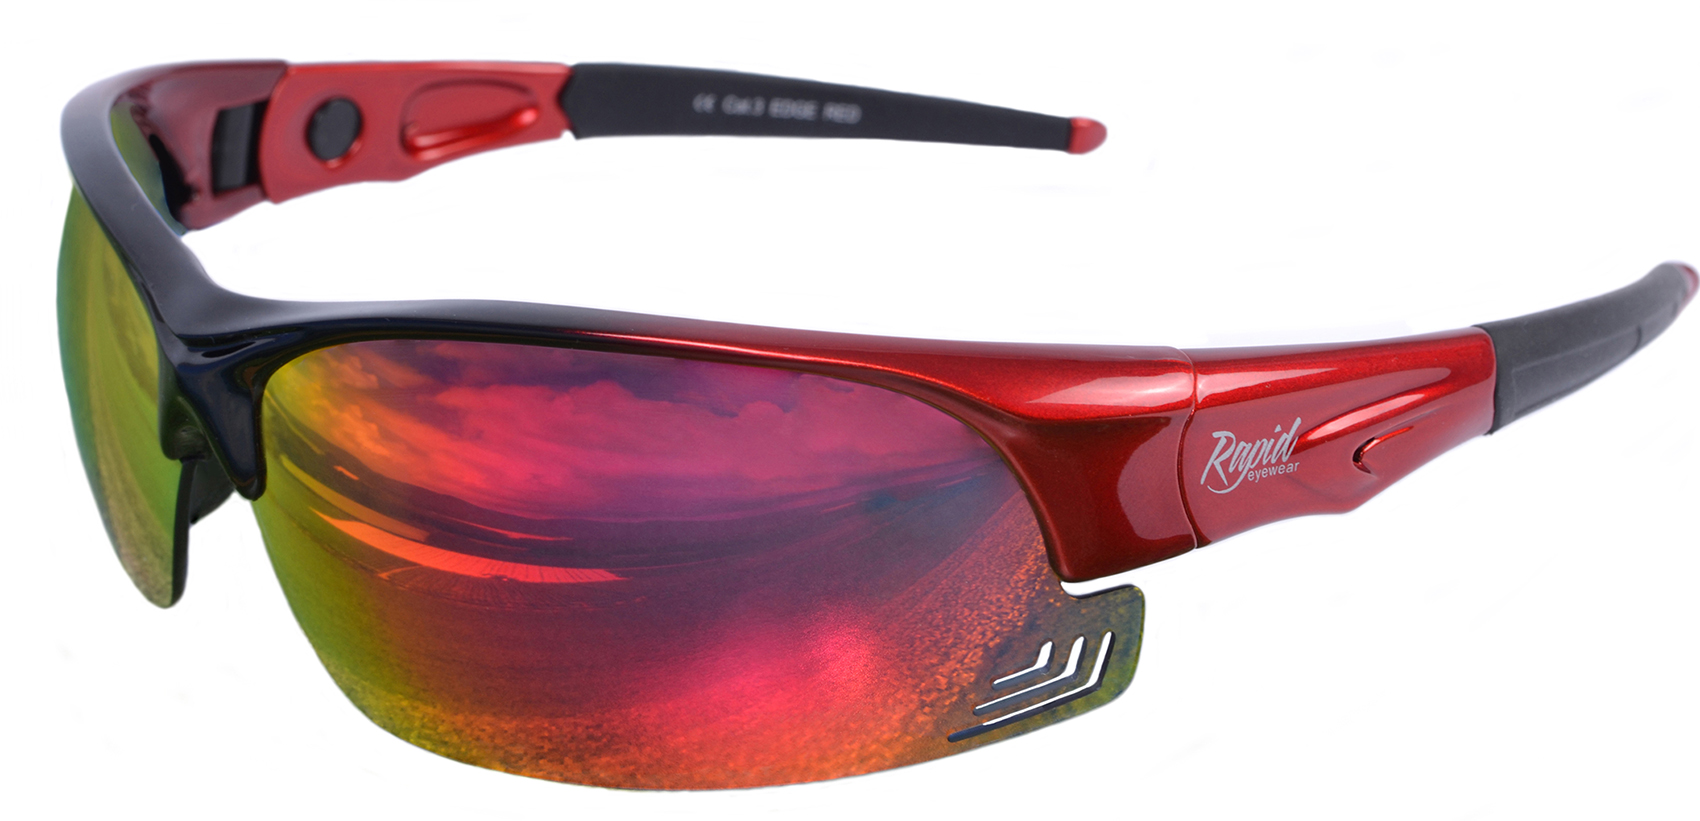 Red sunglasses for cricketers with mirrored lenses